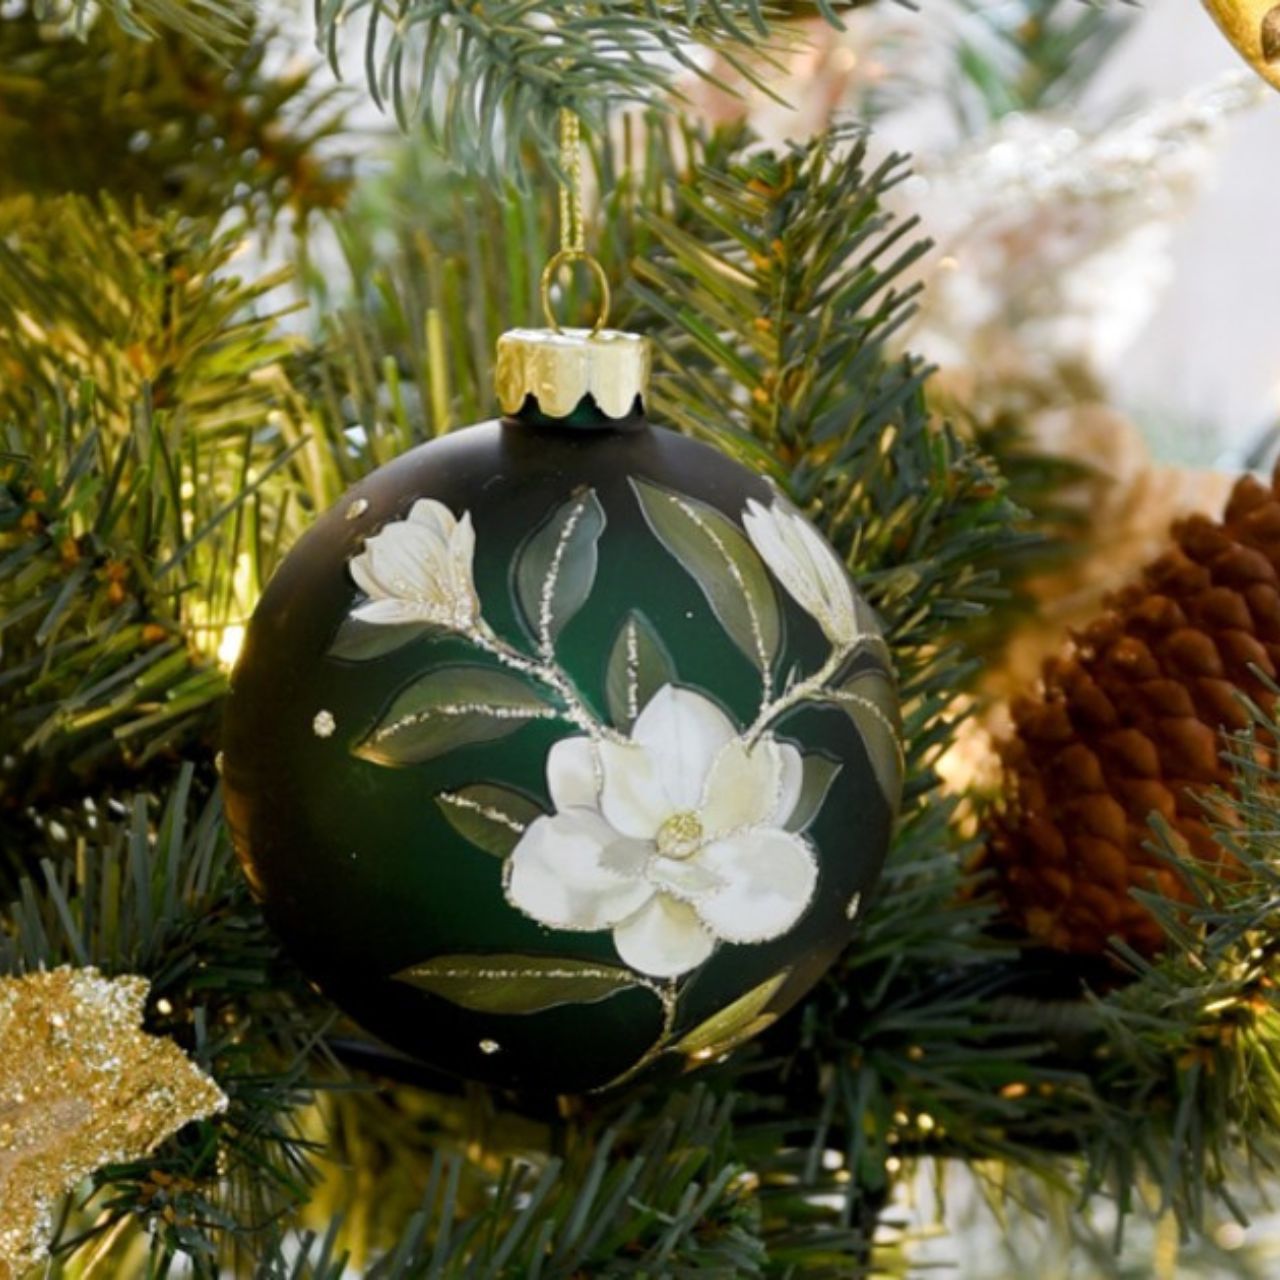 Gisela Graham Green Glass Magnolia Christmas Bauble  This stunning Gisela Graham Green Glass Magnolia Christmas Bauble adds a festive touch to any holiday décor. Decorated with intricate Magnolia details, it is the perfect addition to any Christmas tree.